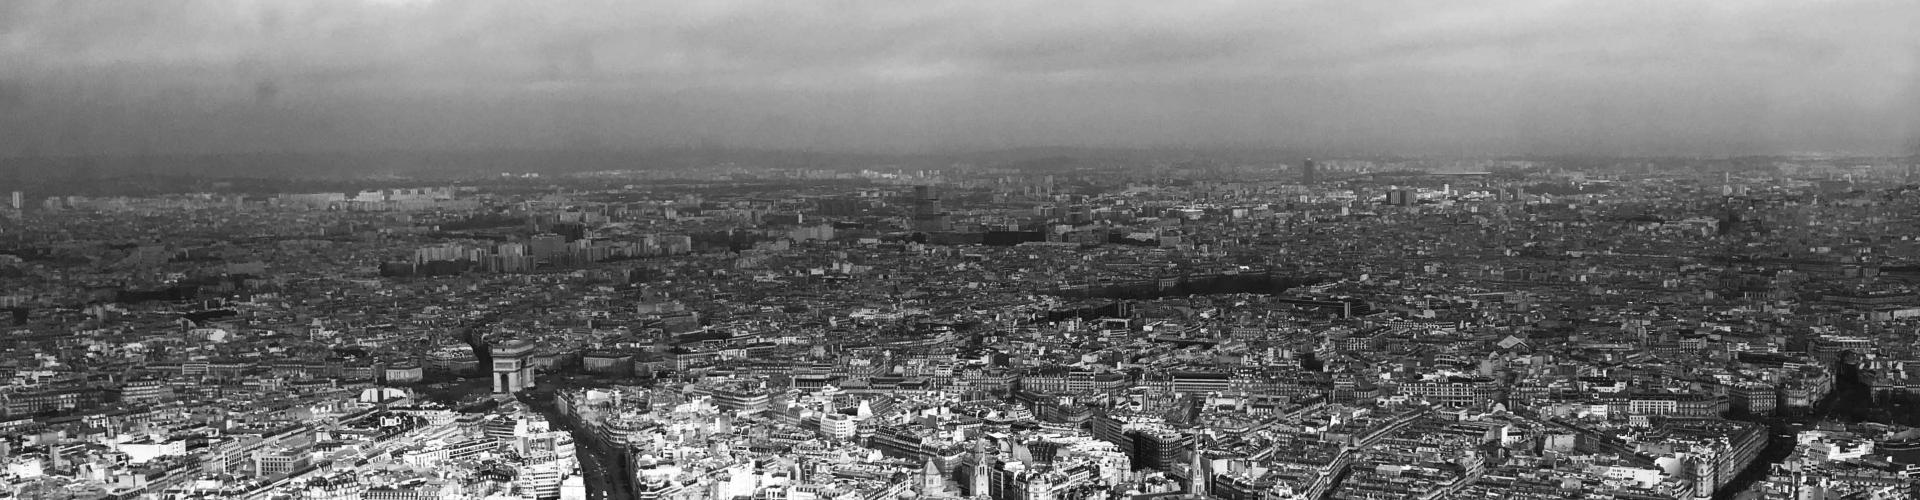 A black and white panorama of a European city